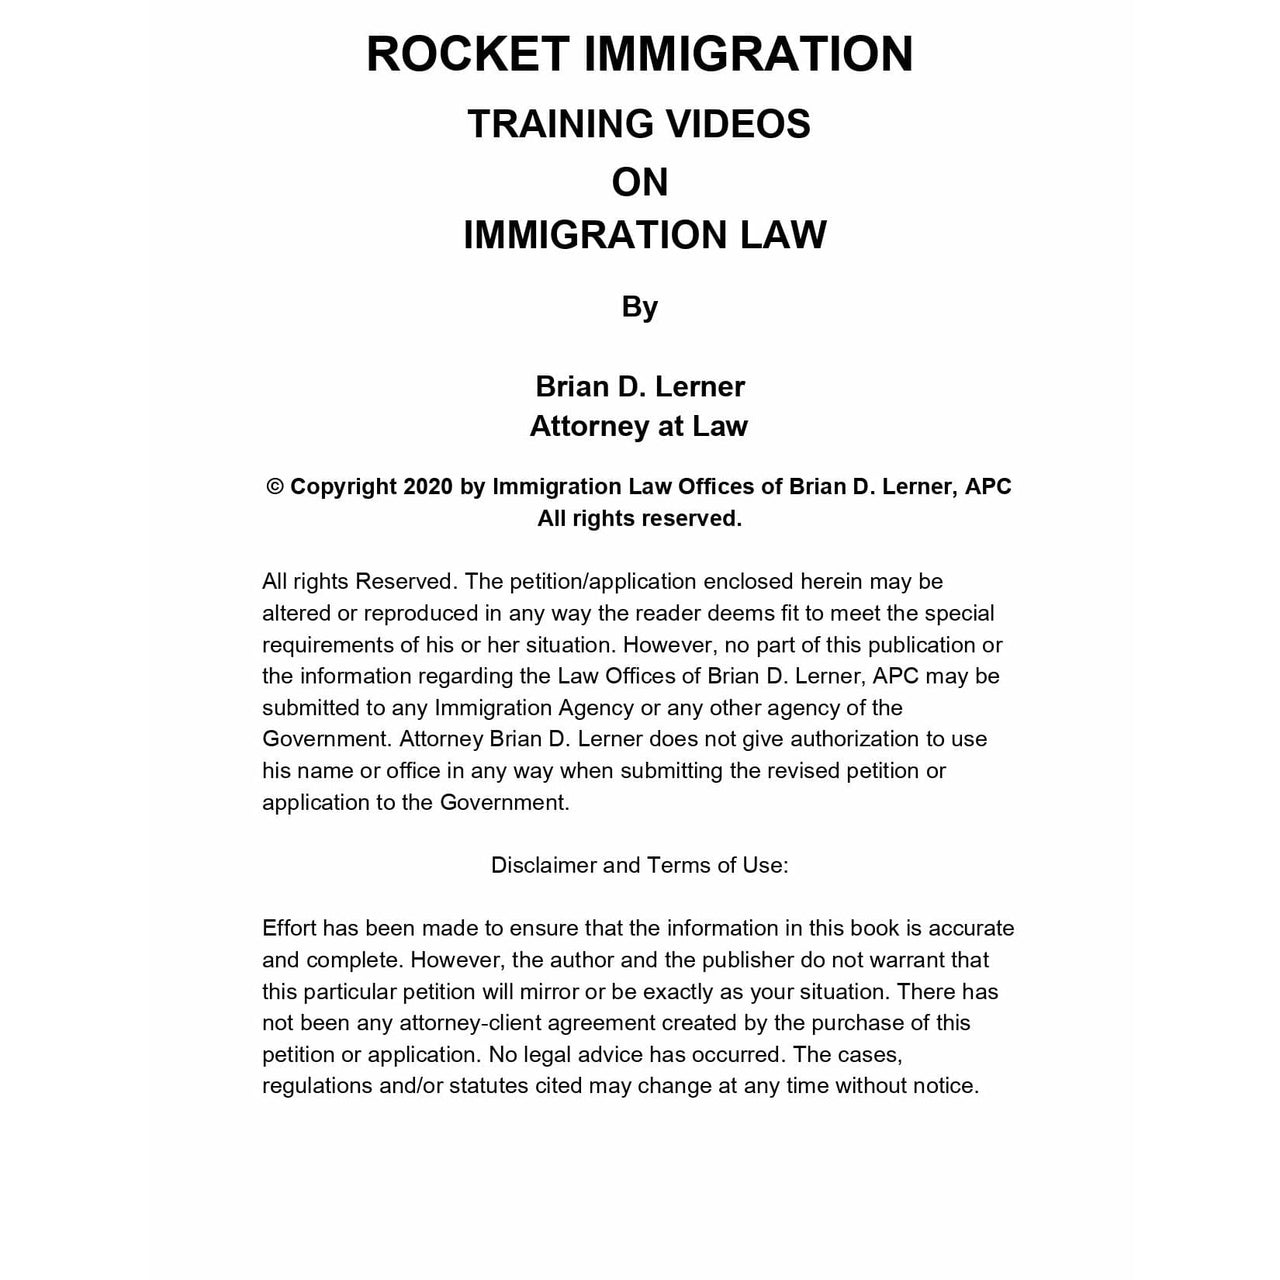 L-1 Intracompany Transferee Visa Training Course Access Packet - Rocket Immigration Petitions